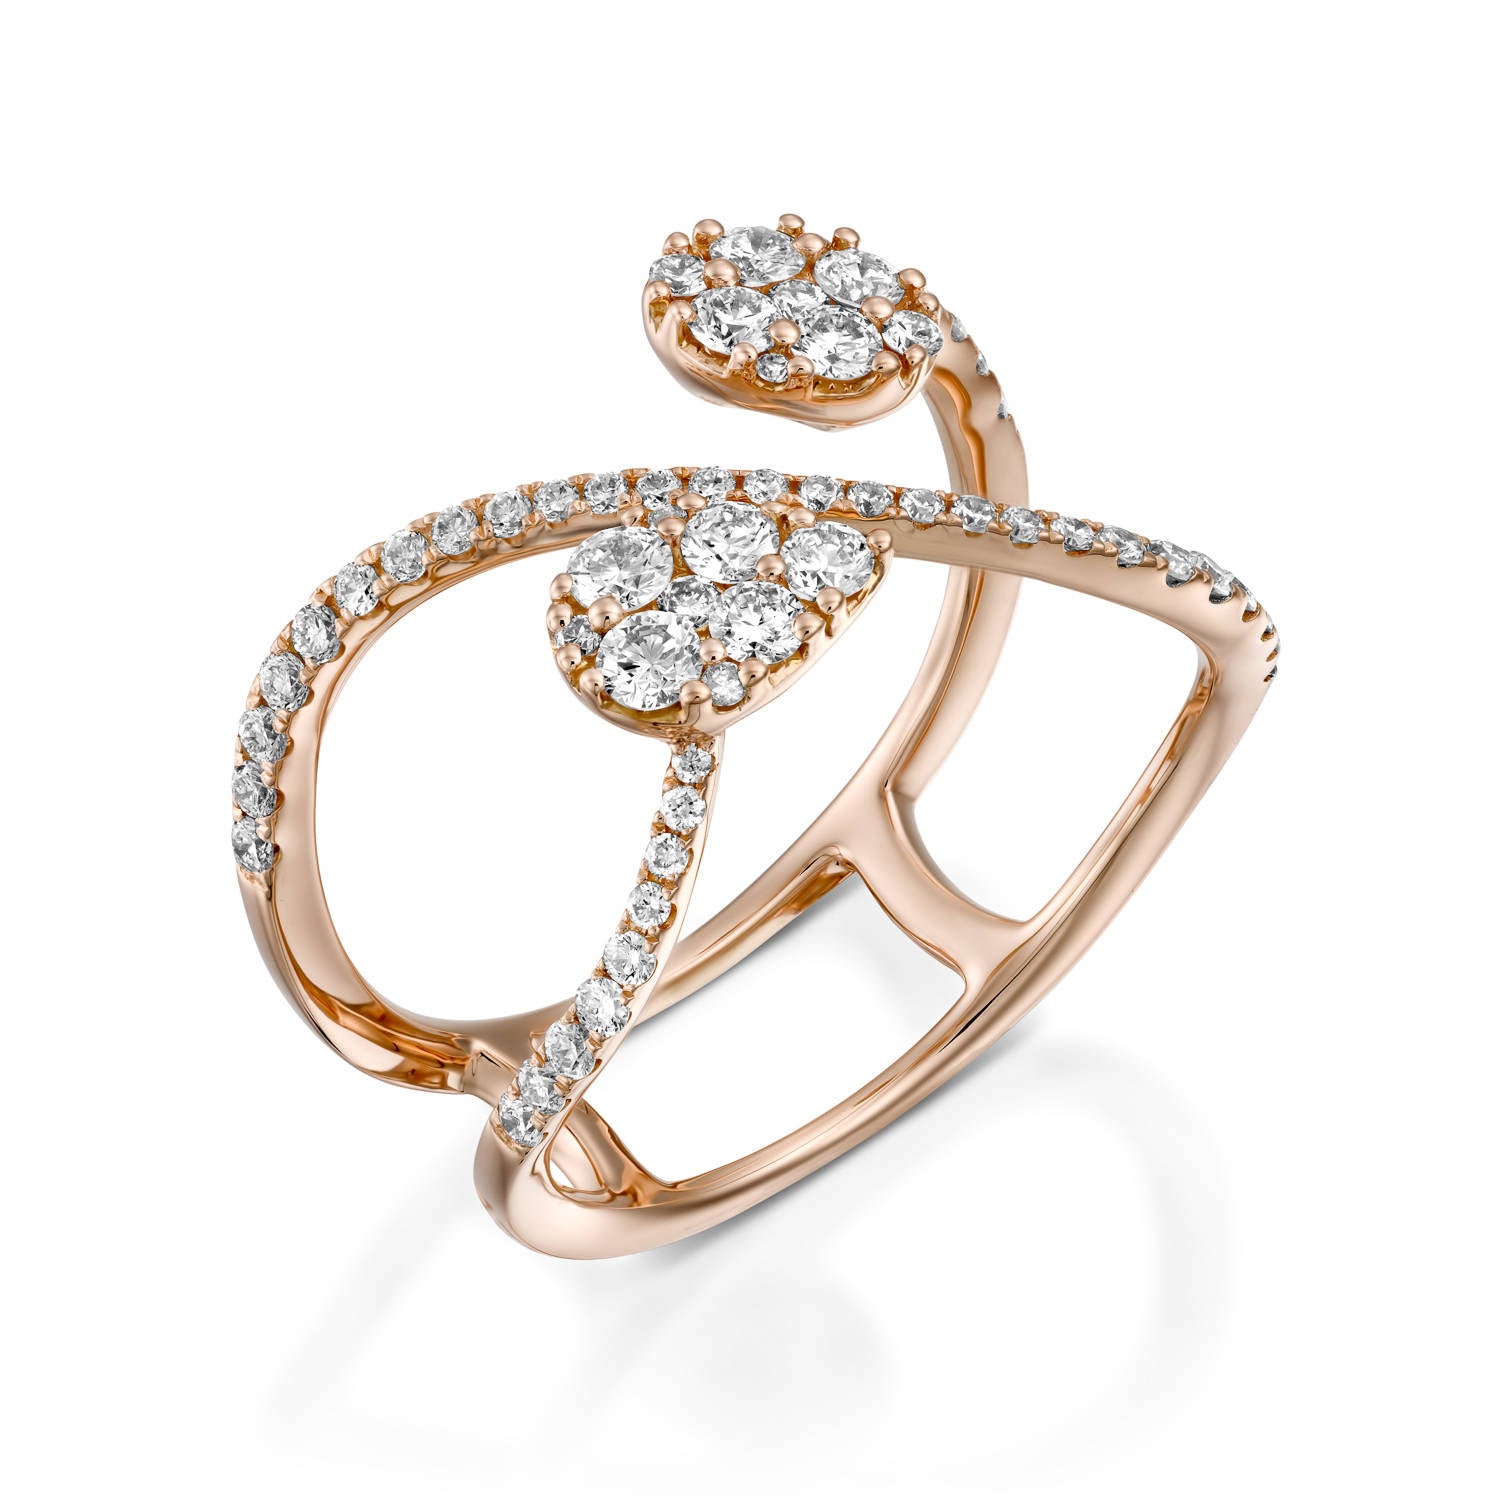 Diamond Rings Designs From Tanishq - South India Jewels